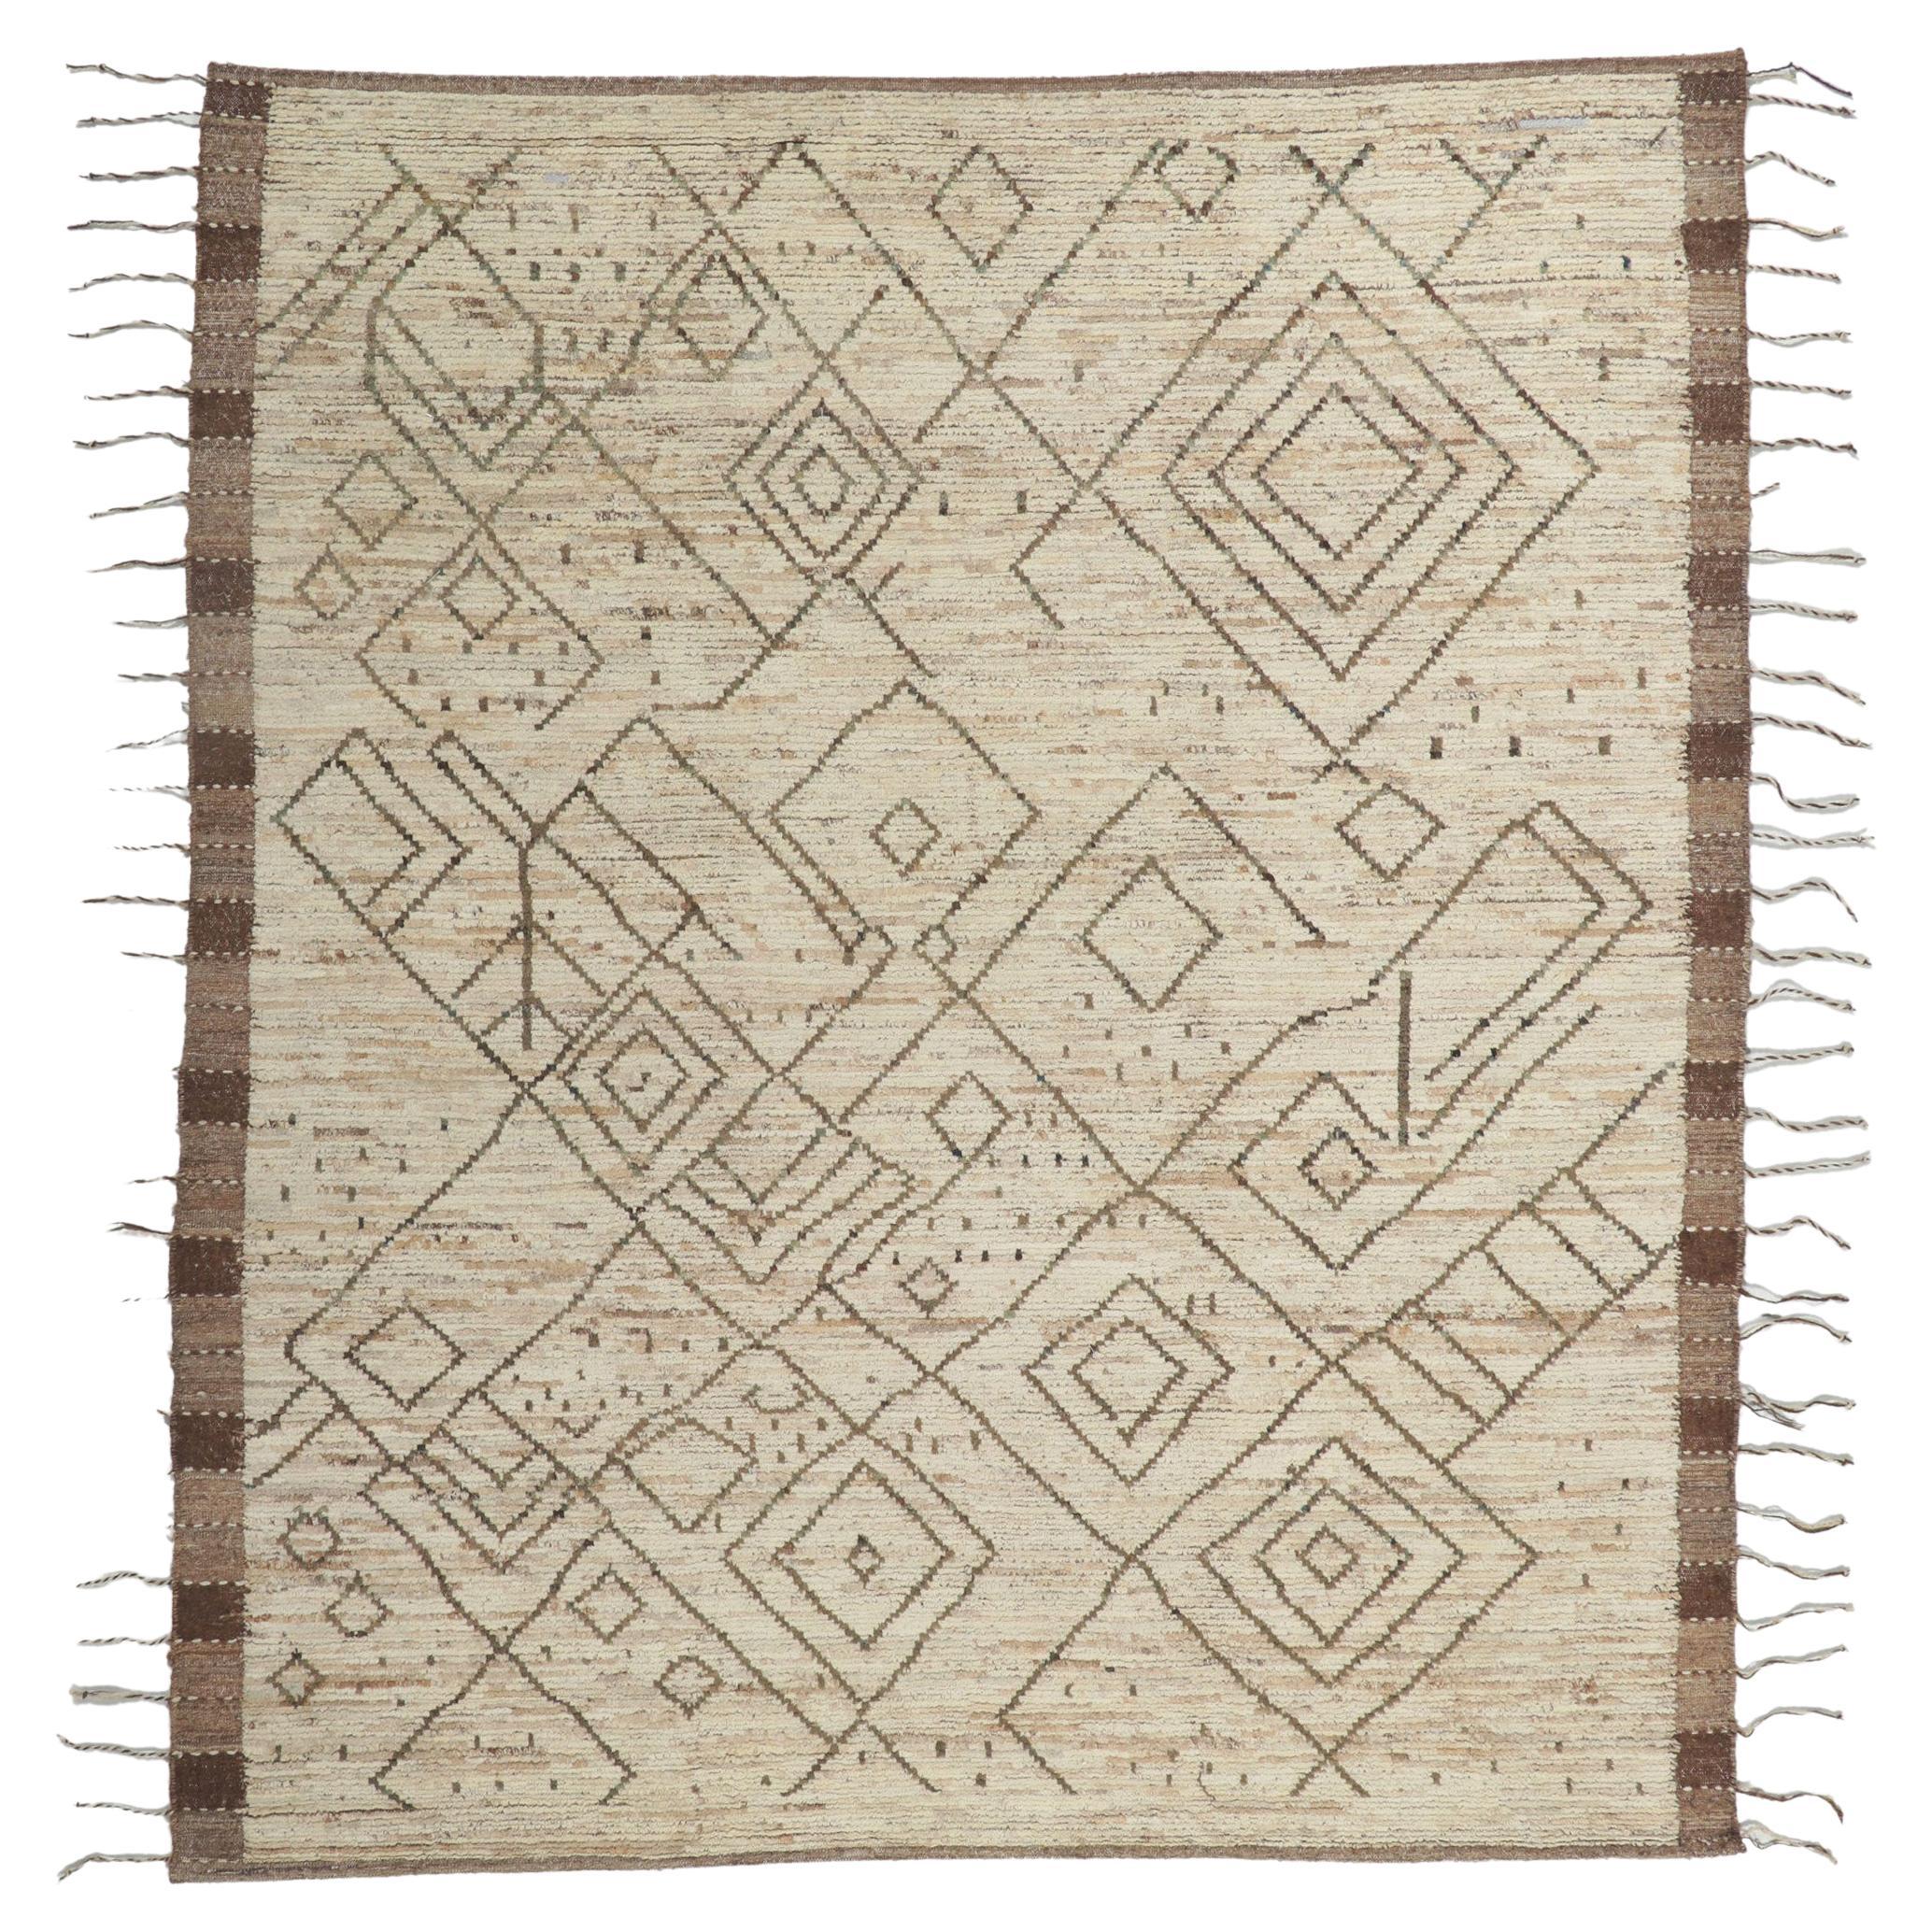 New Contemporary Moroccan Rug with Short Pile